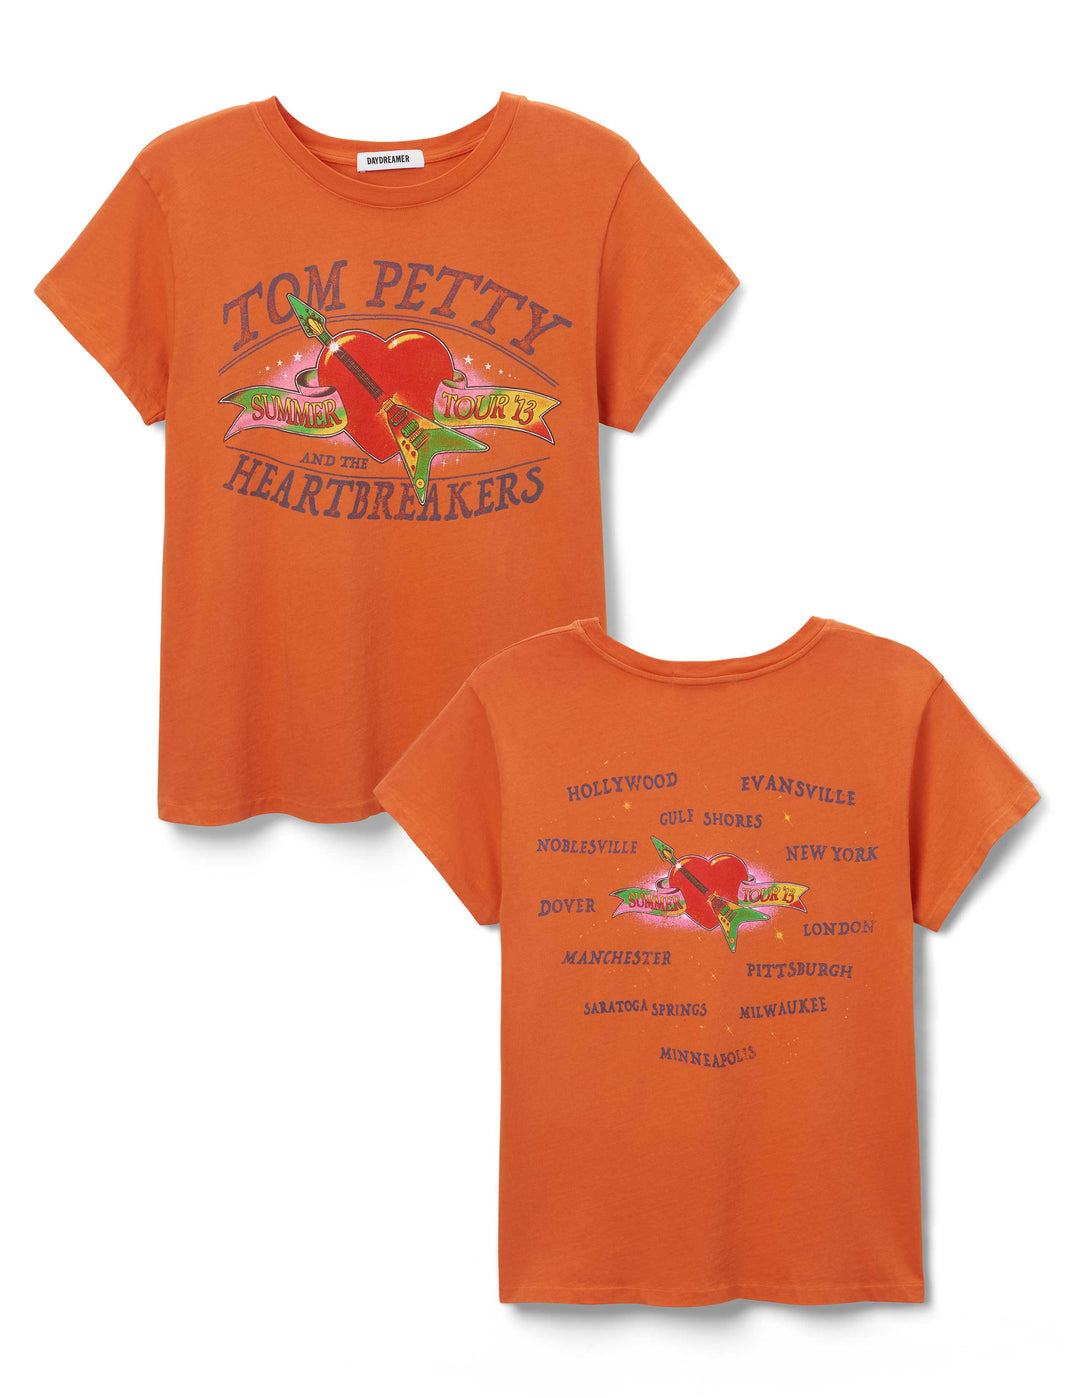 TOM PETTY SUMMER TOUR '13 TOUR TEE-TANGERINE - Kingfisher Road - Online Boutique